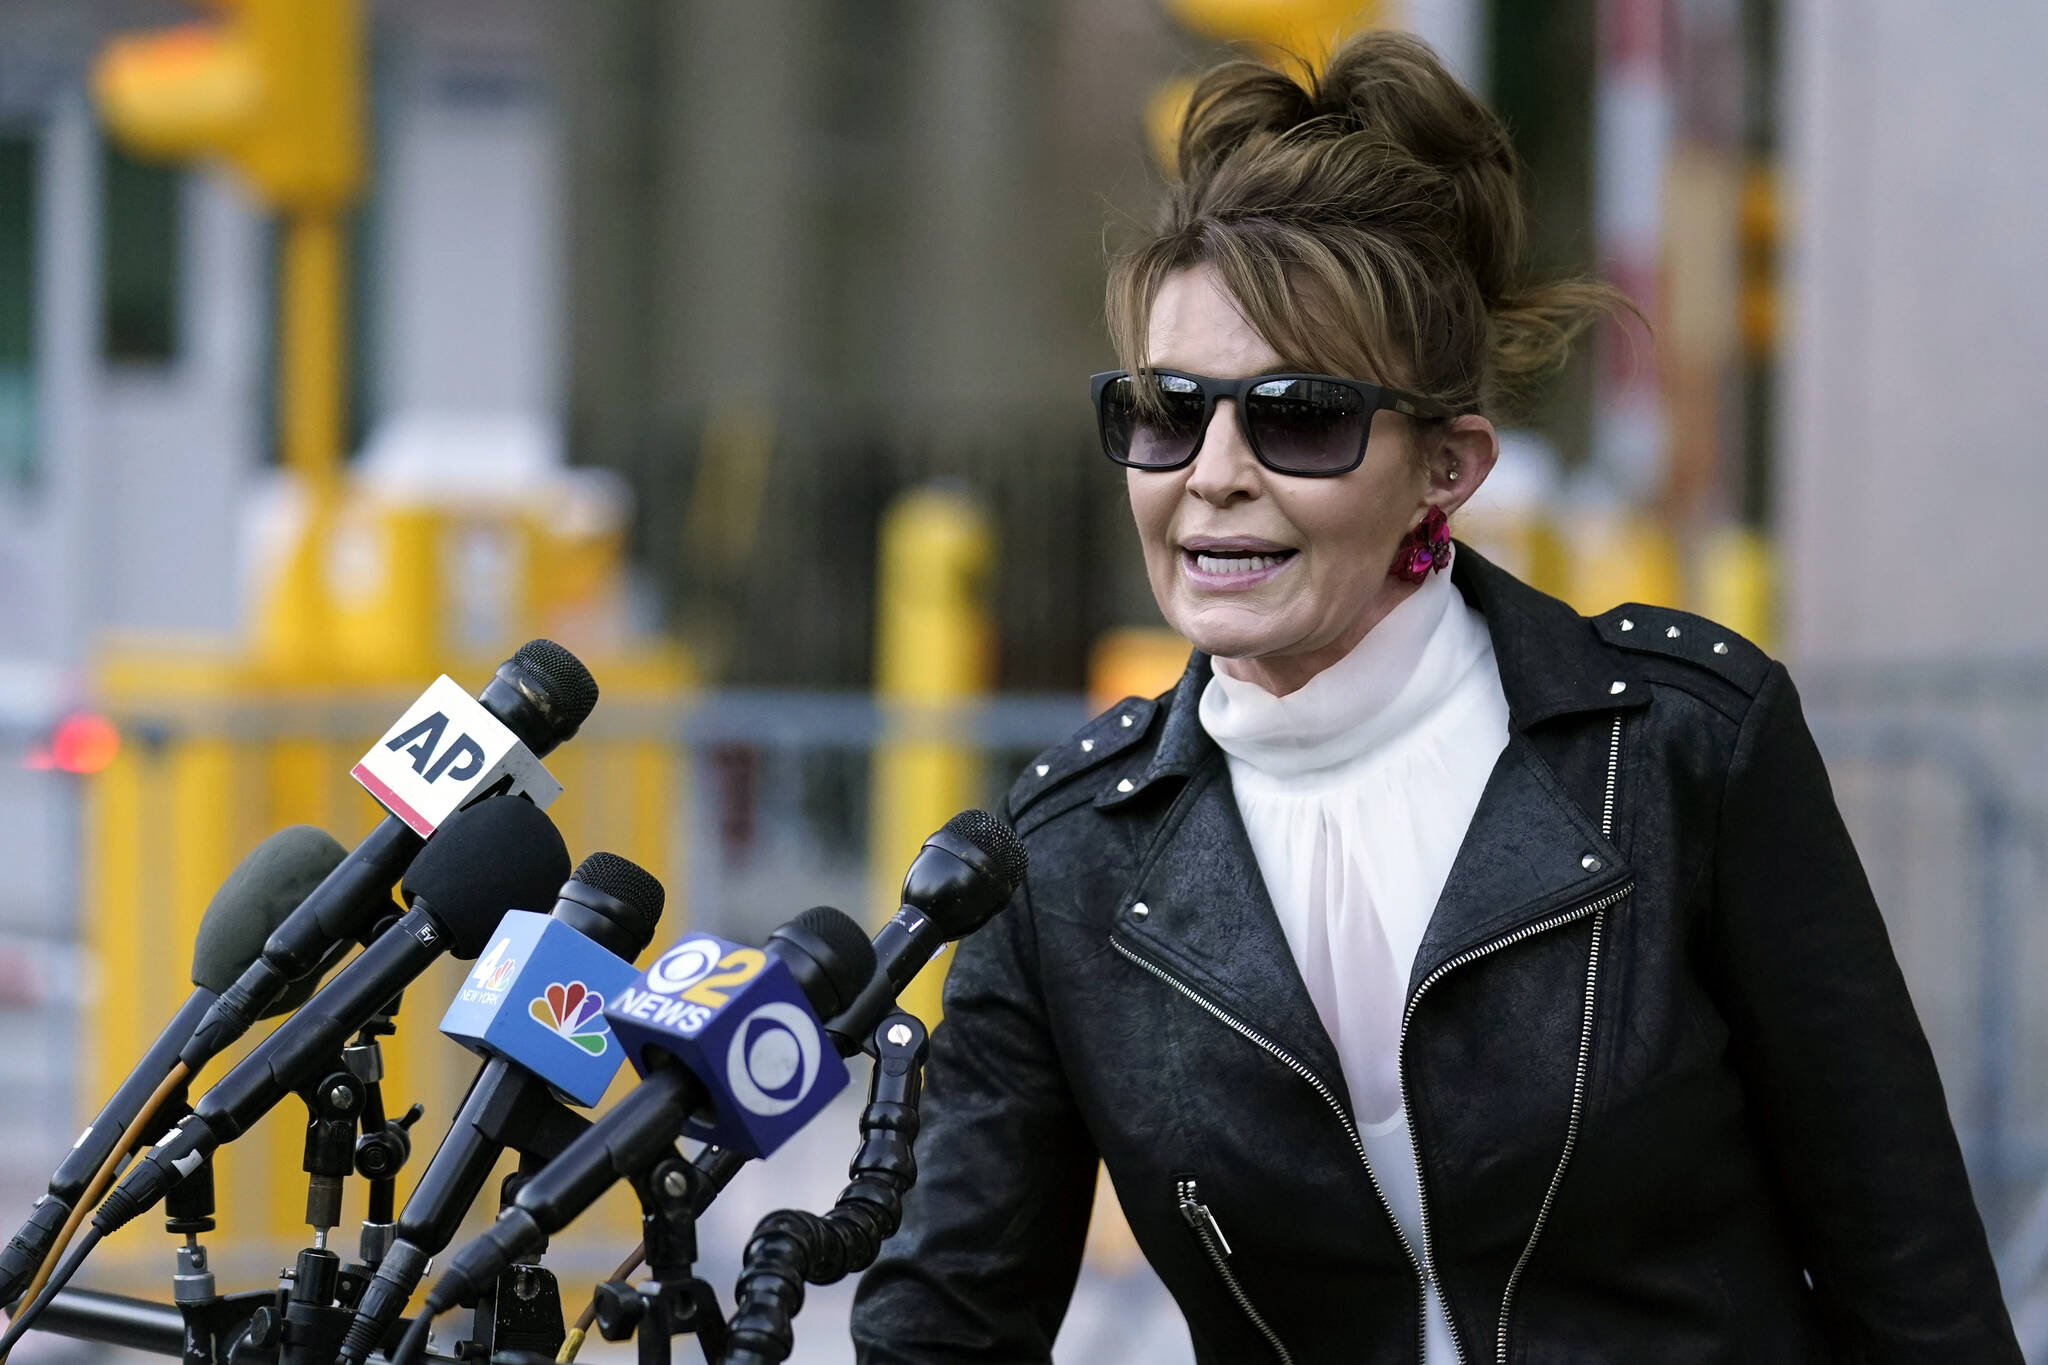 Former Alaska Gov. Sarah Palin speaks briefly to reporters as she leaves a courthouse in New York, Feb. 14, 2022. Palin is one of 48 candidates for Alaska’s lone U.S. House seat, which was held for decades by Republican Rep. Don Young, who died last month. Palin says she’s serious about the run though some critics have questioned her motivations. (AP Photo / Seth Wenig)